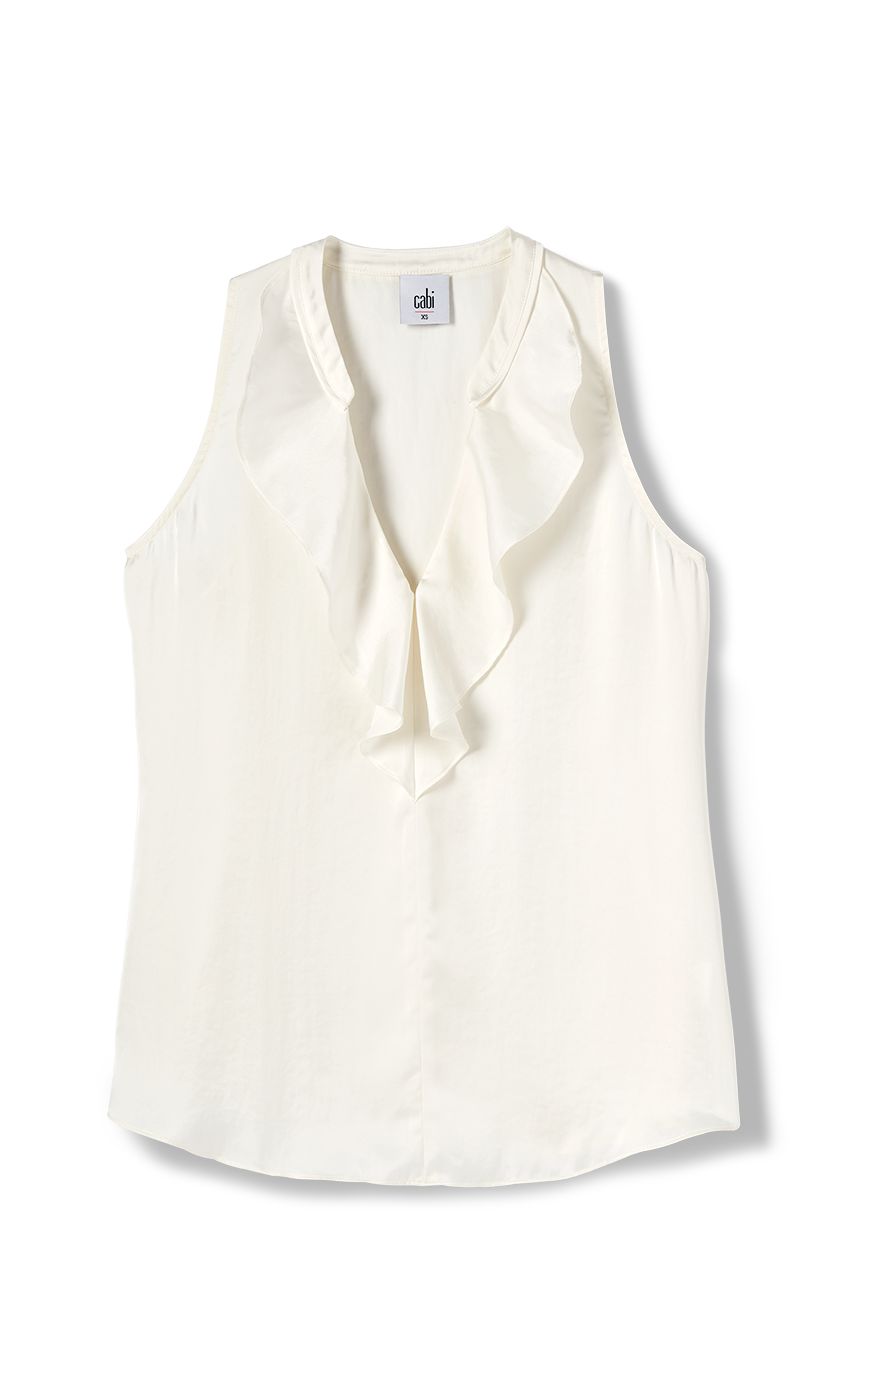 Showstopper Top | cabi